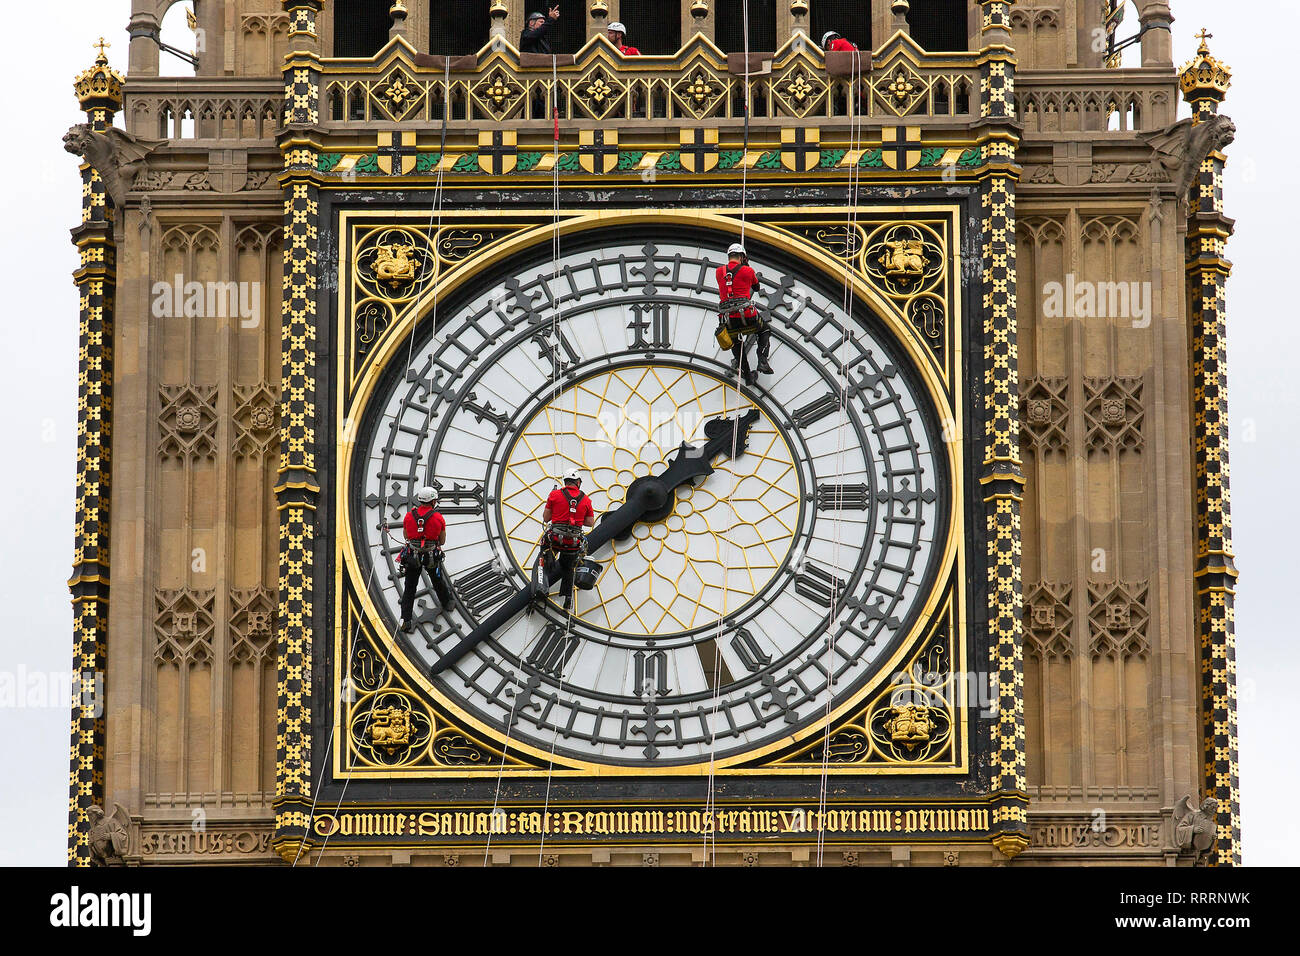 Workers clean the clock face of the Elizabeth Tower (Big Ben) of the Houses of Parliament on August 21, 2014. Stock Photo